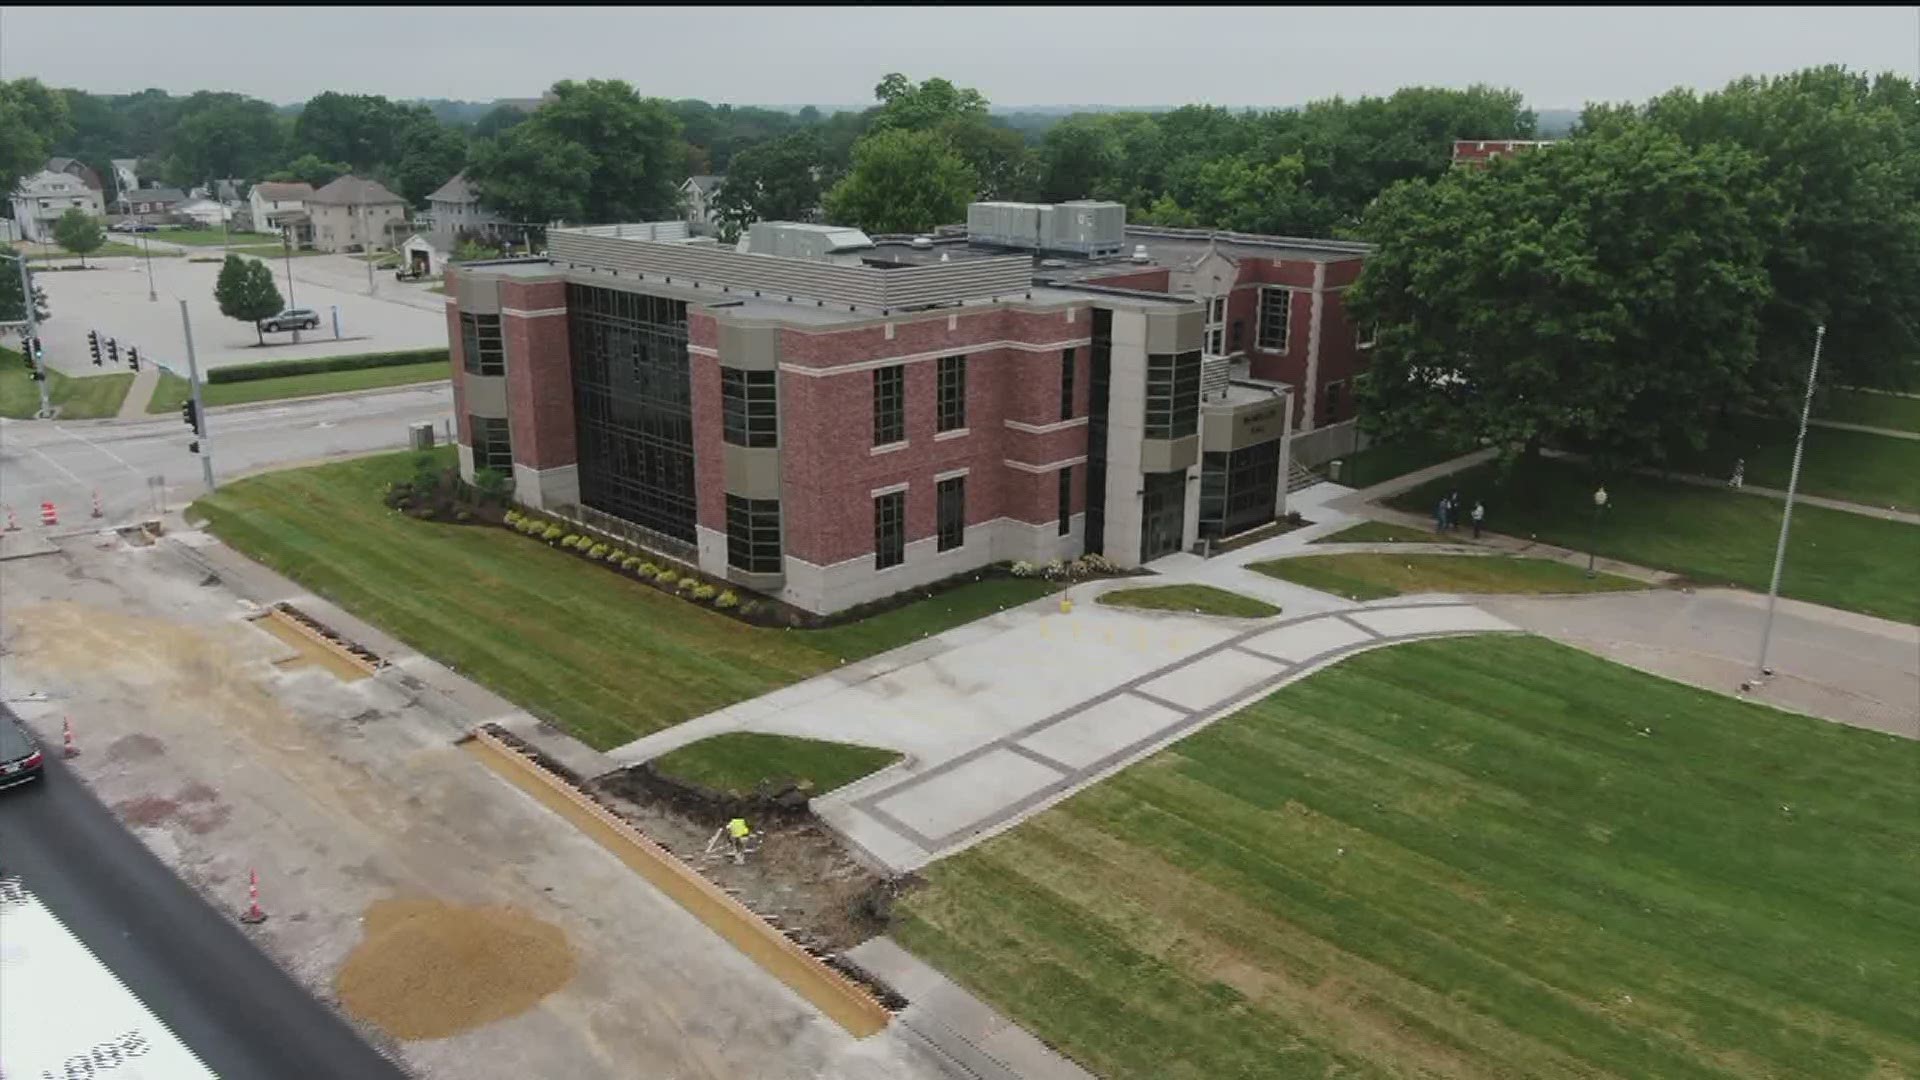 McMullen Hall at St. Ambrose University in Davenport, Iowa is ready to go thanks to local union contractors.